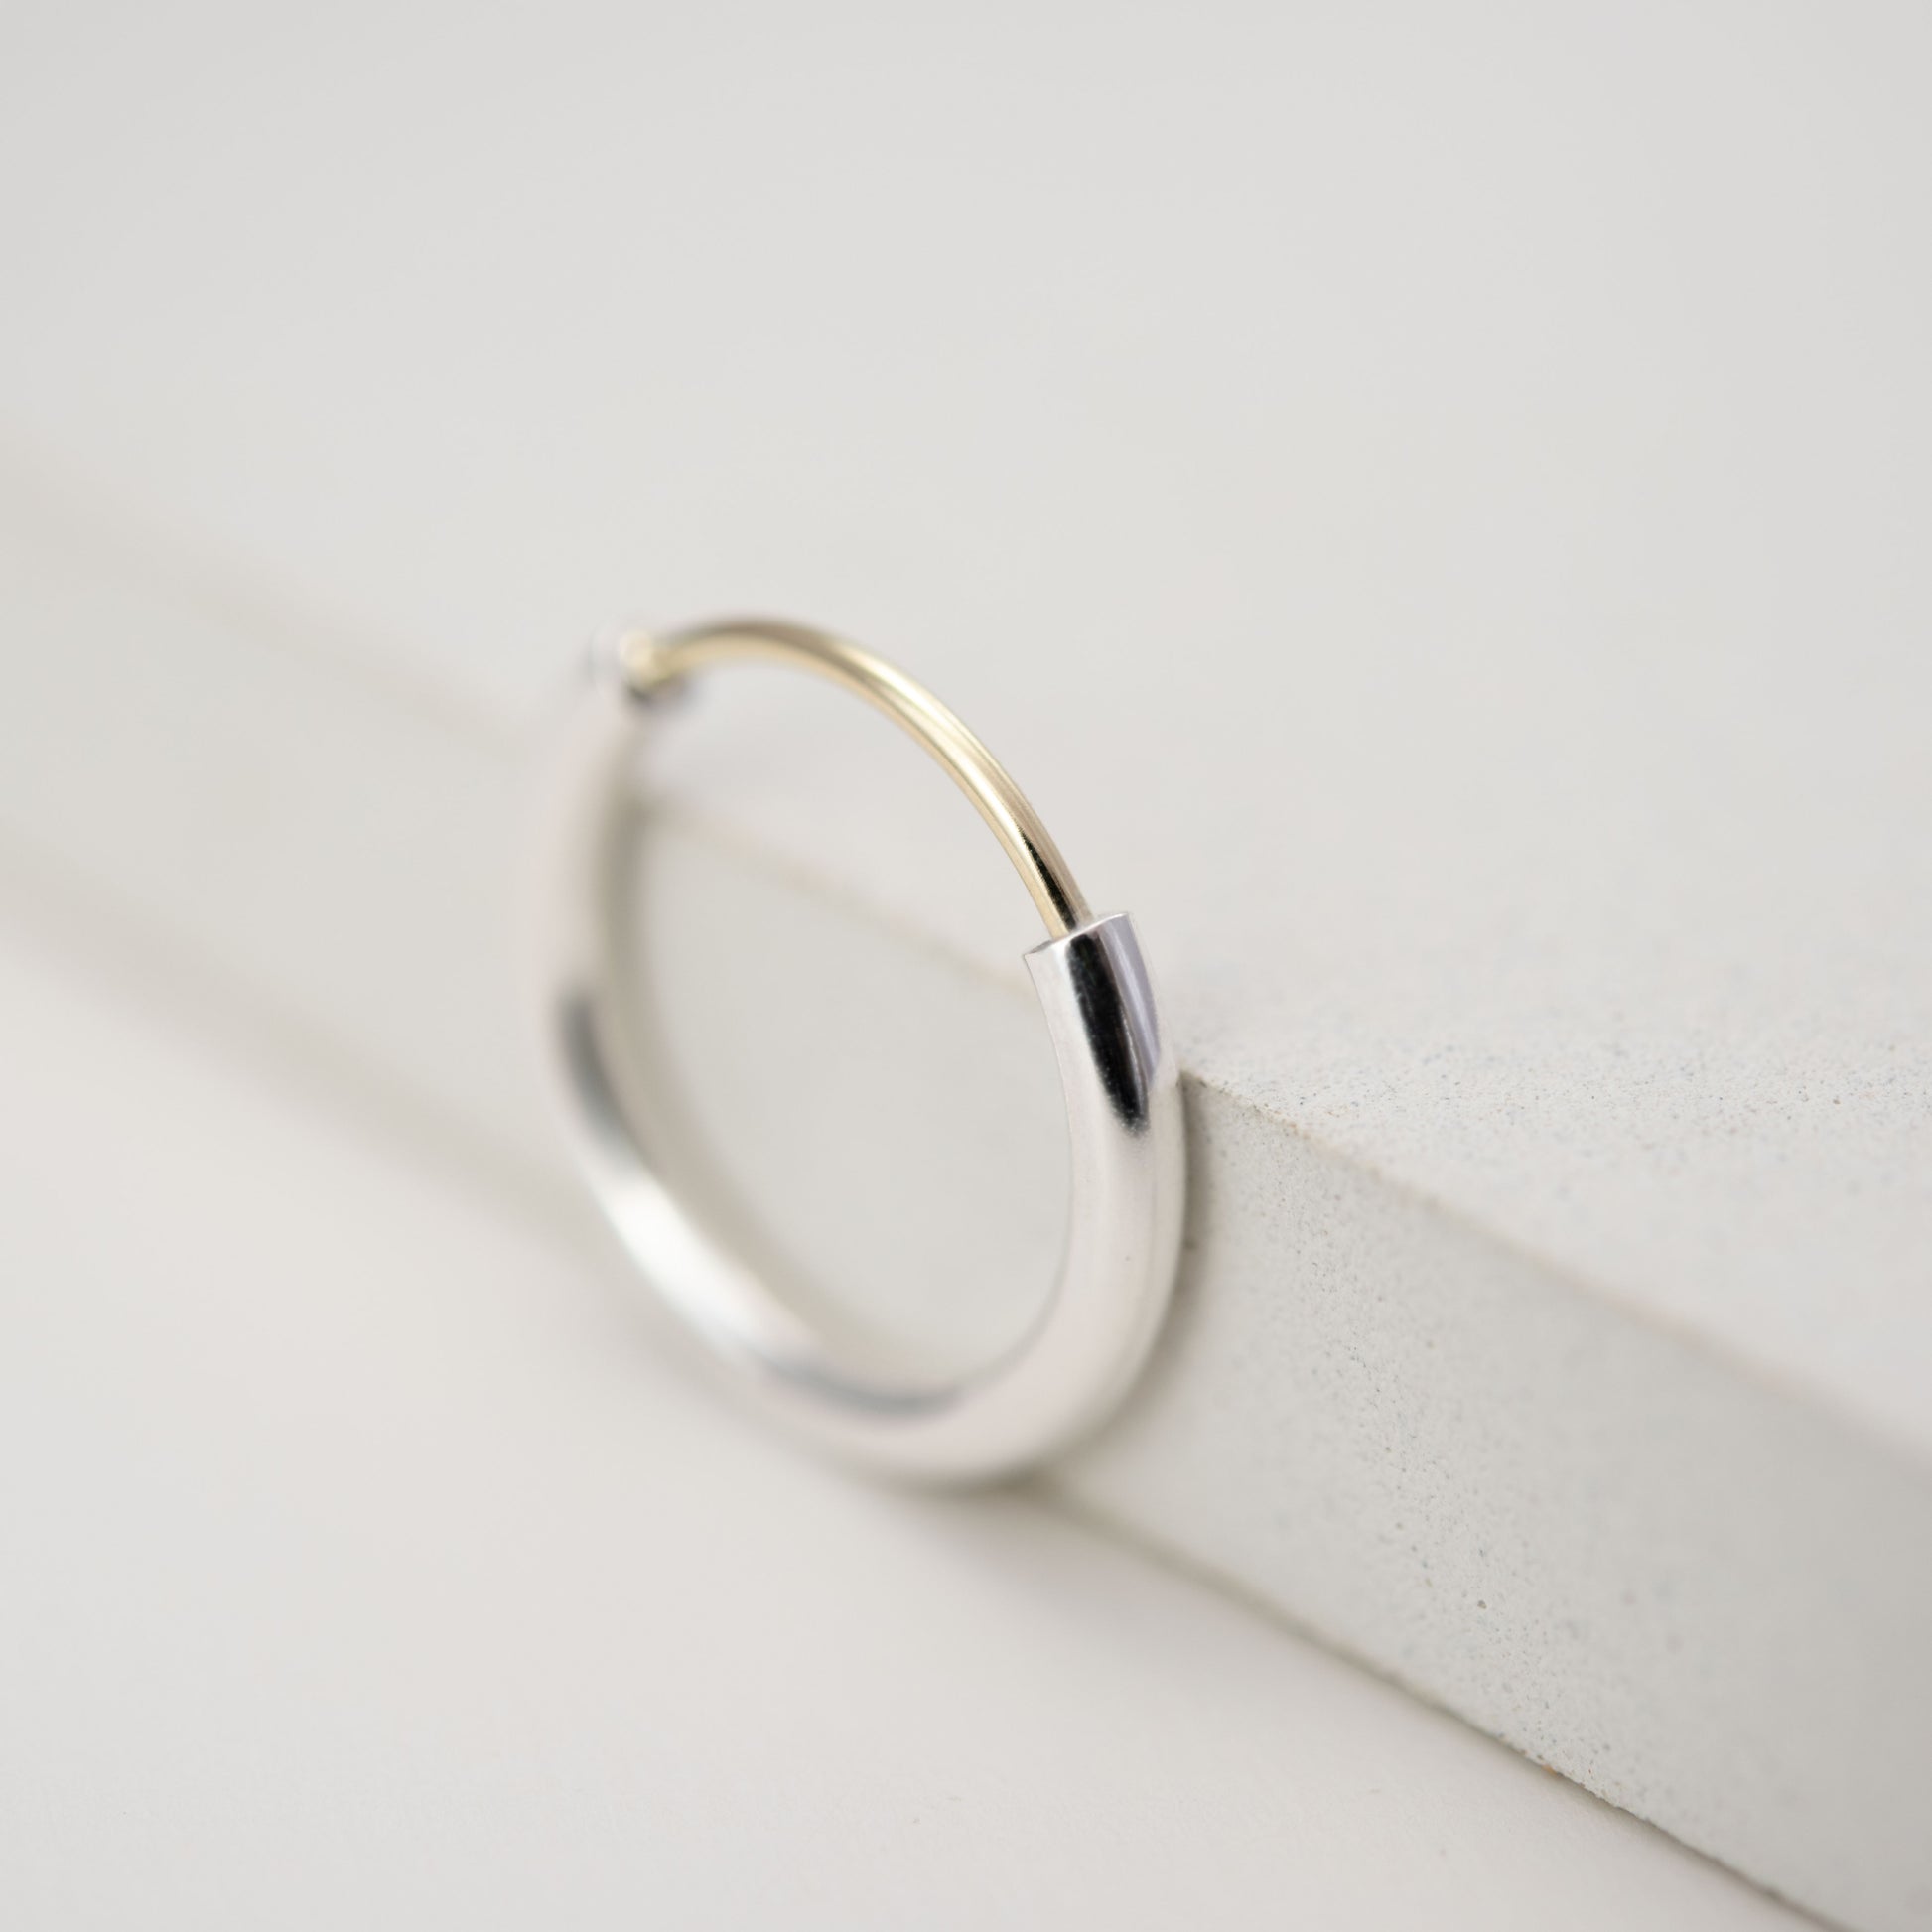 Minimalistic Proposal ring by AgJc 